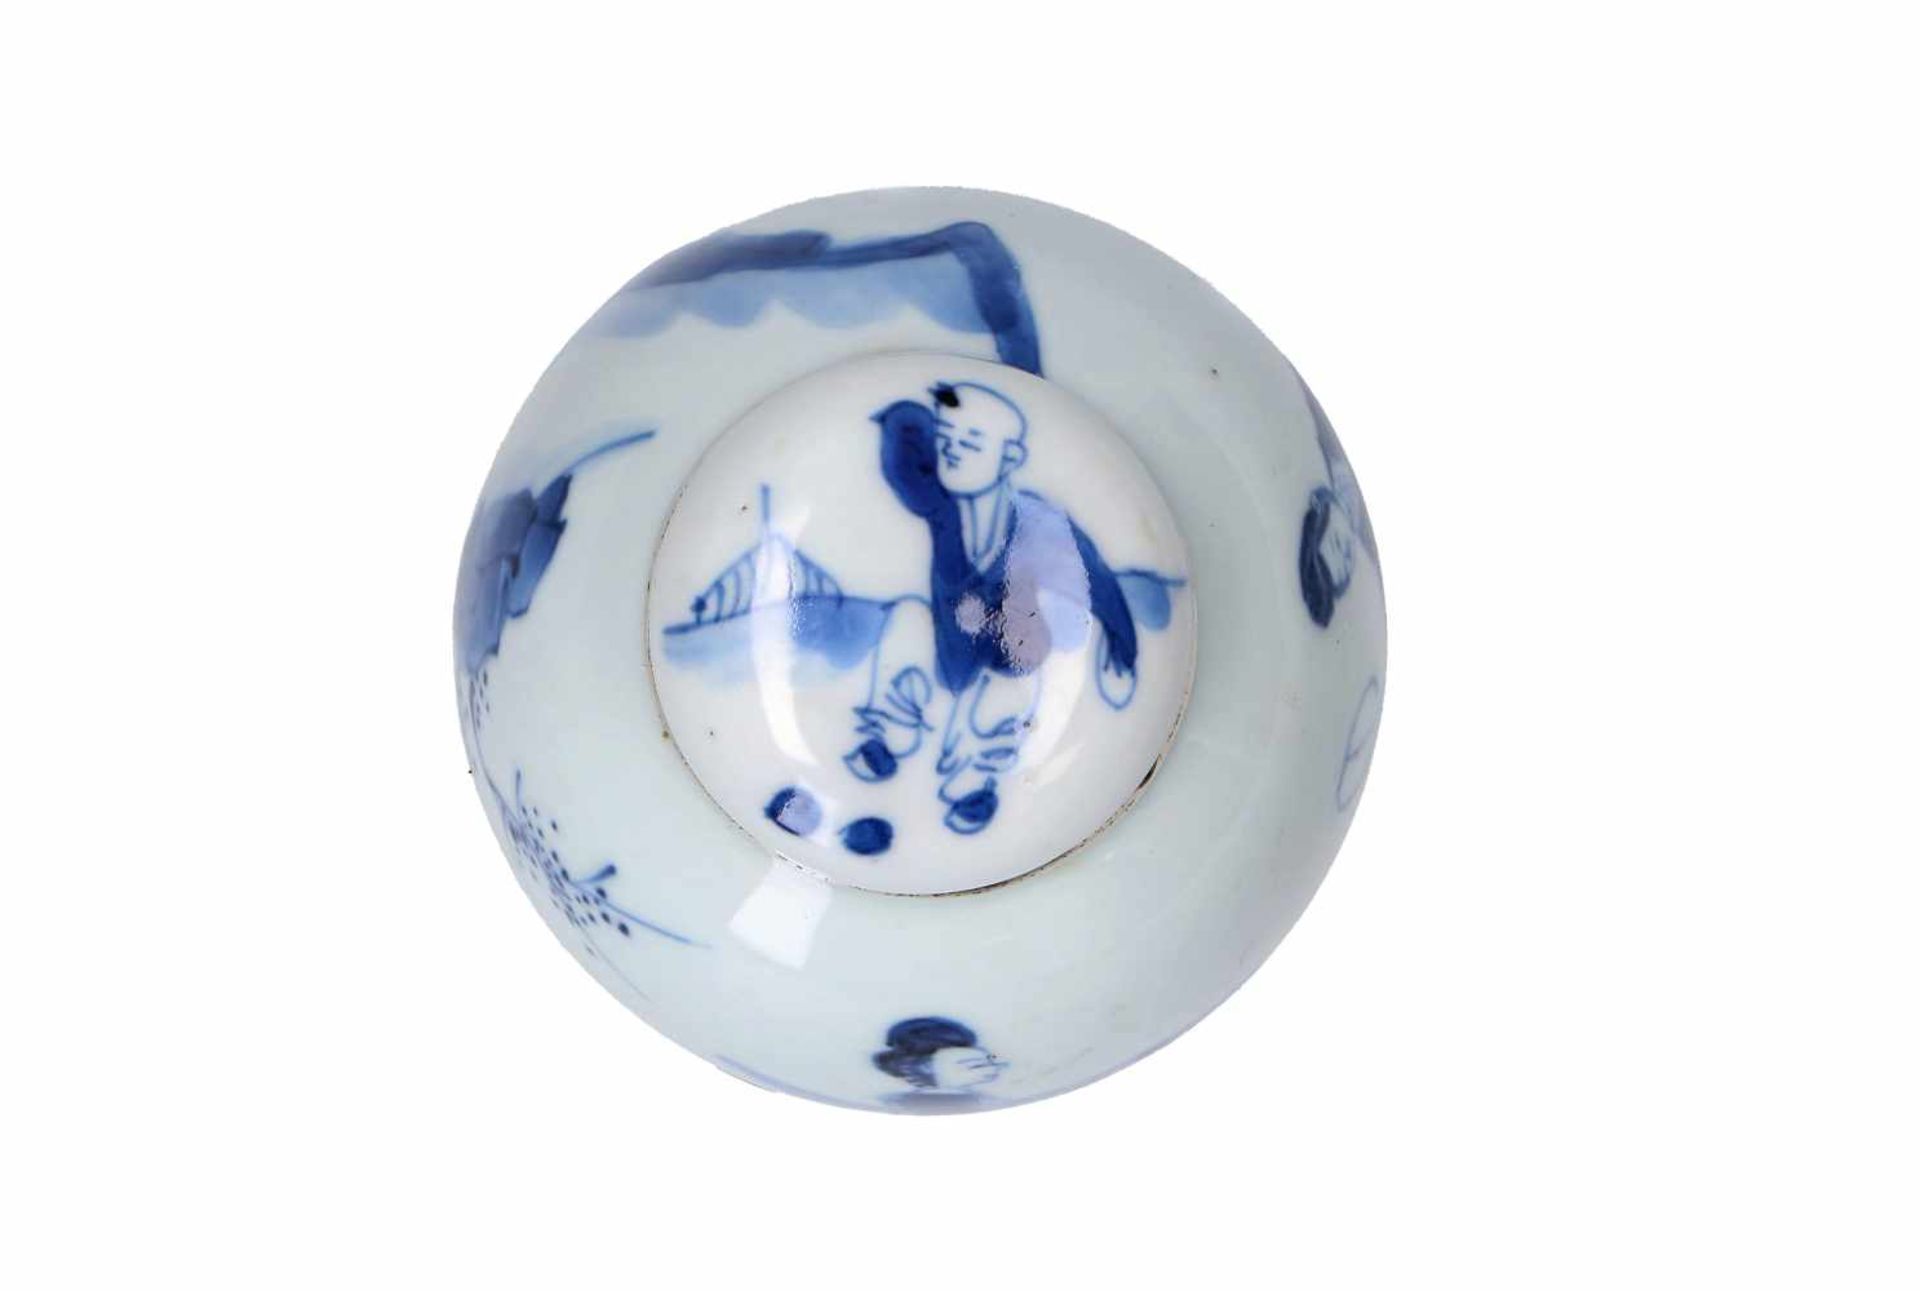 A blue and white porcelain lidded jar with later Dutch silver mounting, decorated with figures in - Image 5 of 11